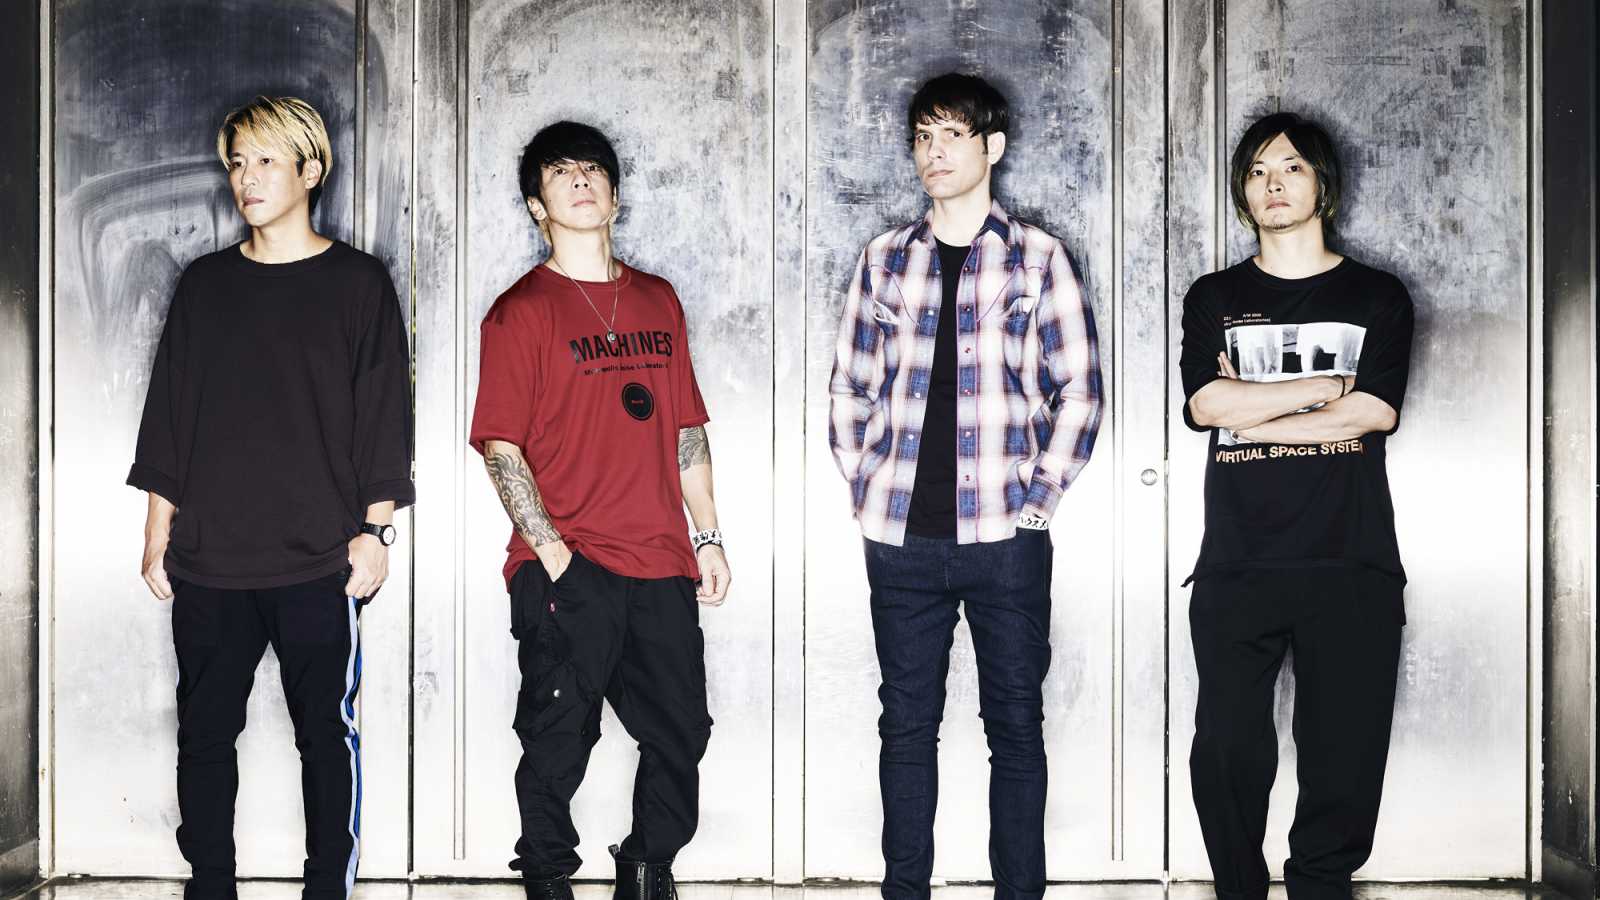 MONOEYES Announce First Live Streaming Concert © MONOEYES. All rights reserved.